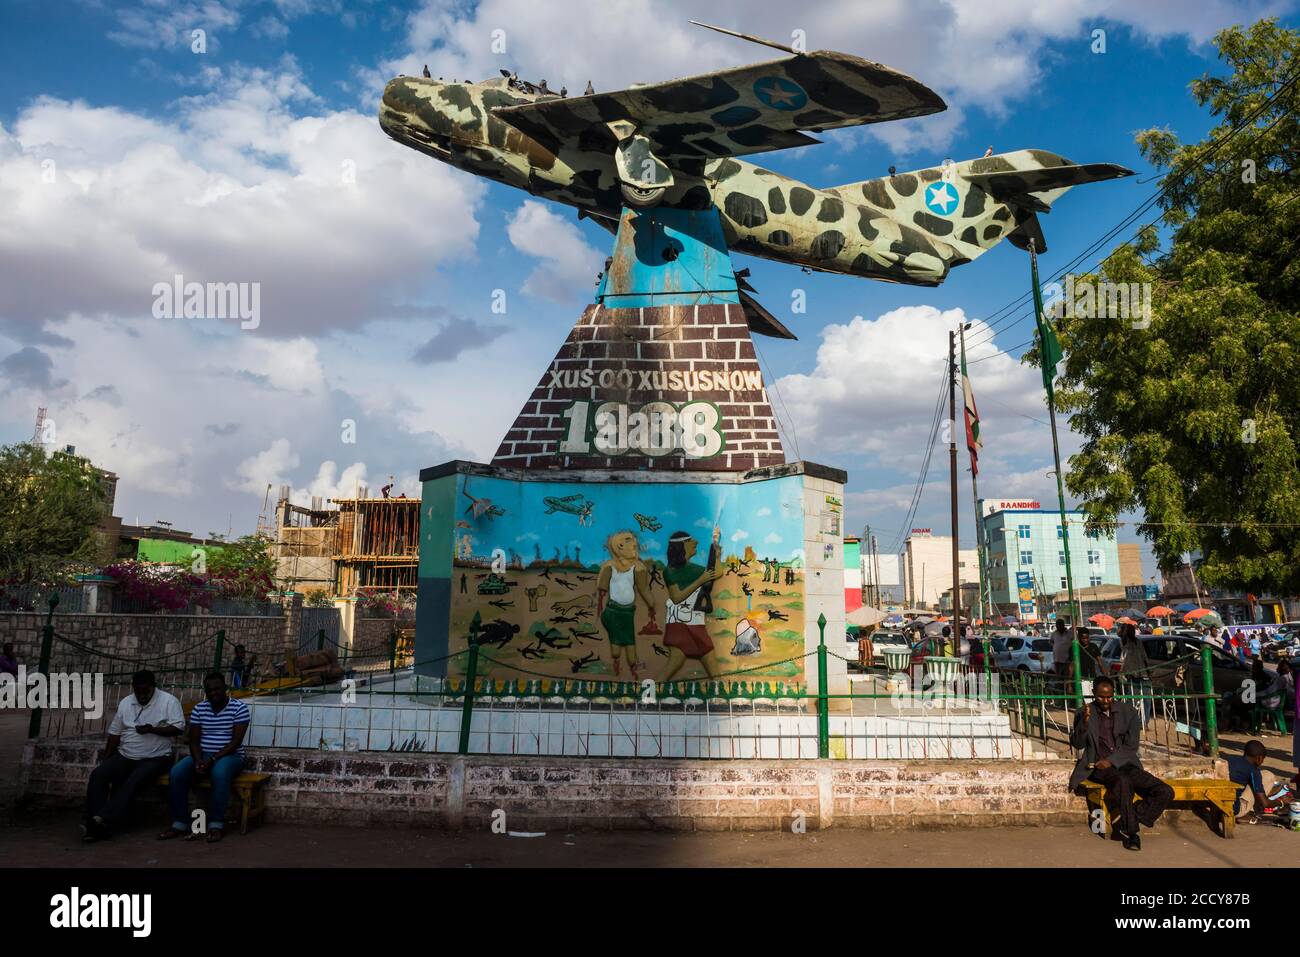 Old russian MIG airplane in the center of Hargeisa, Somaliland, Somalia Stock Photo